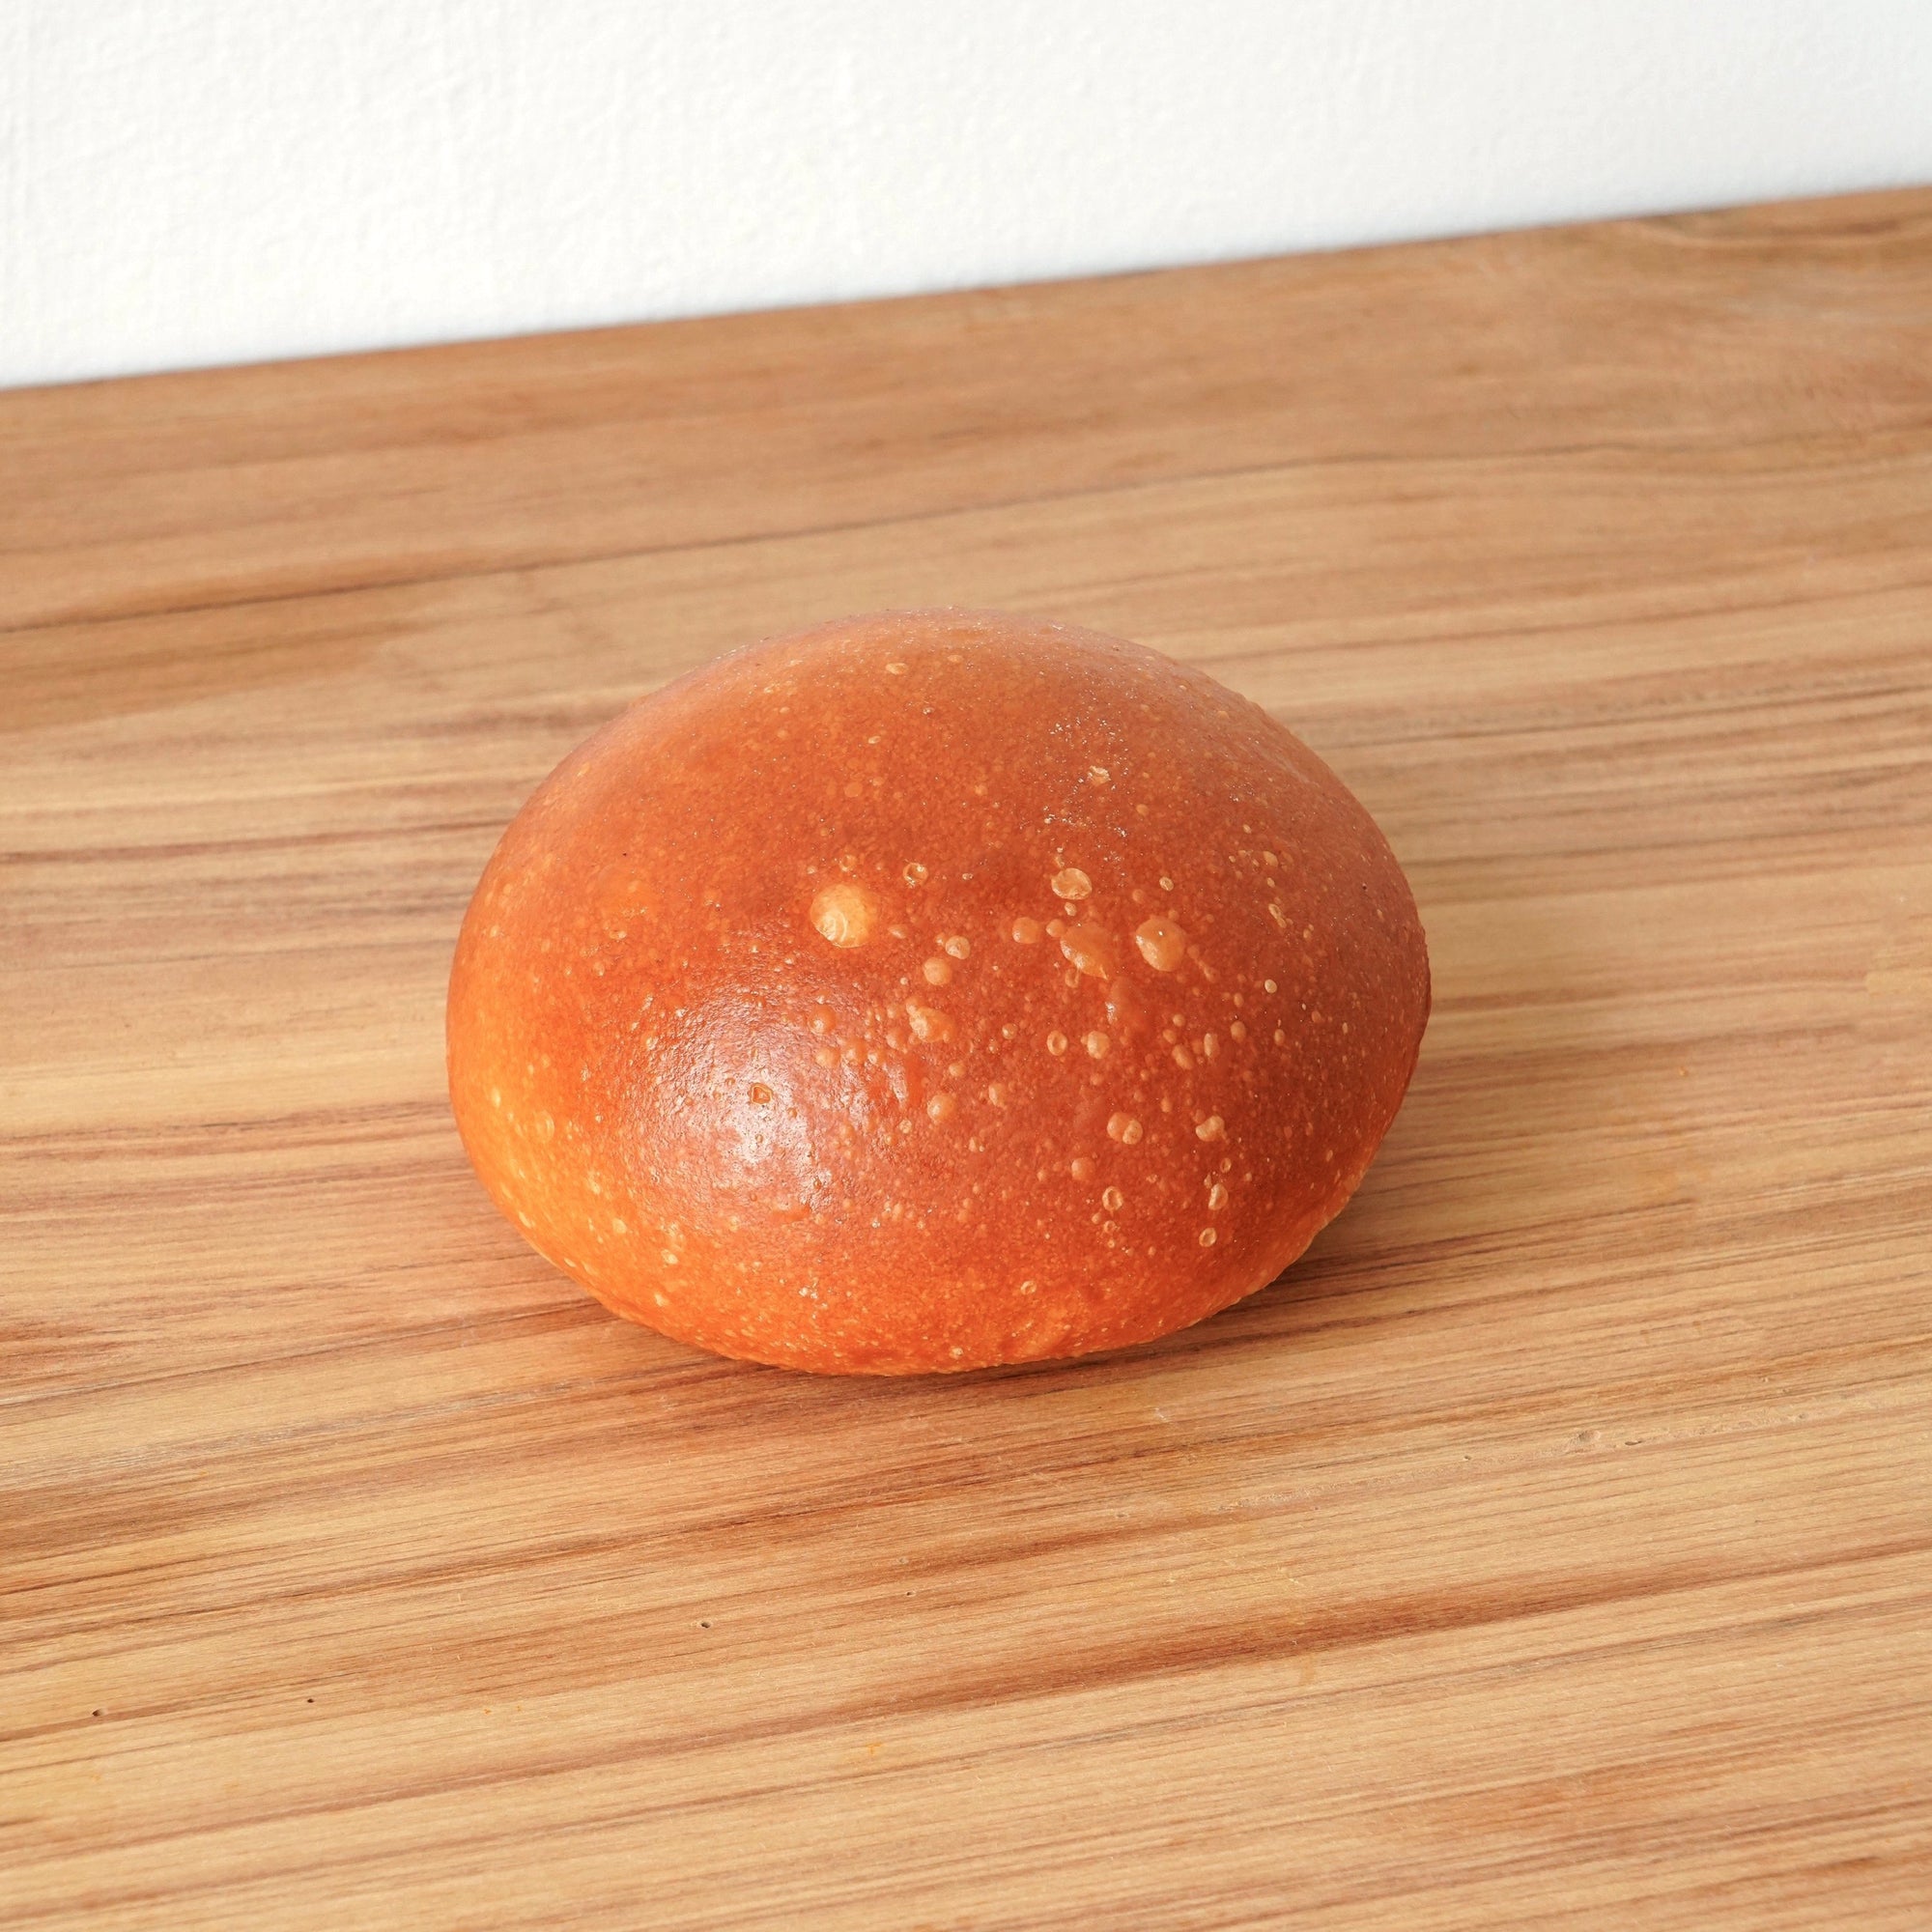 image of the whole burger bun. it is golden brown